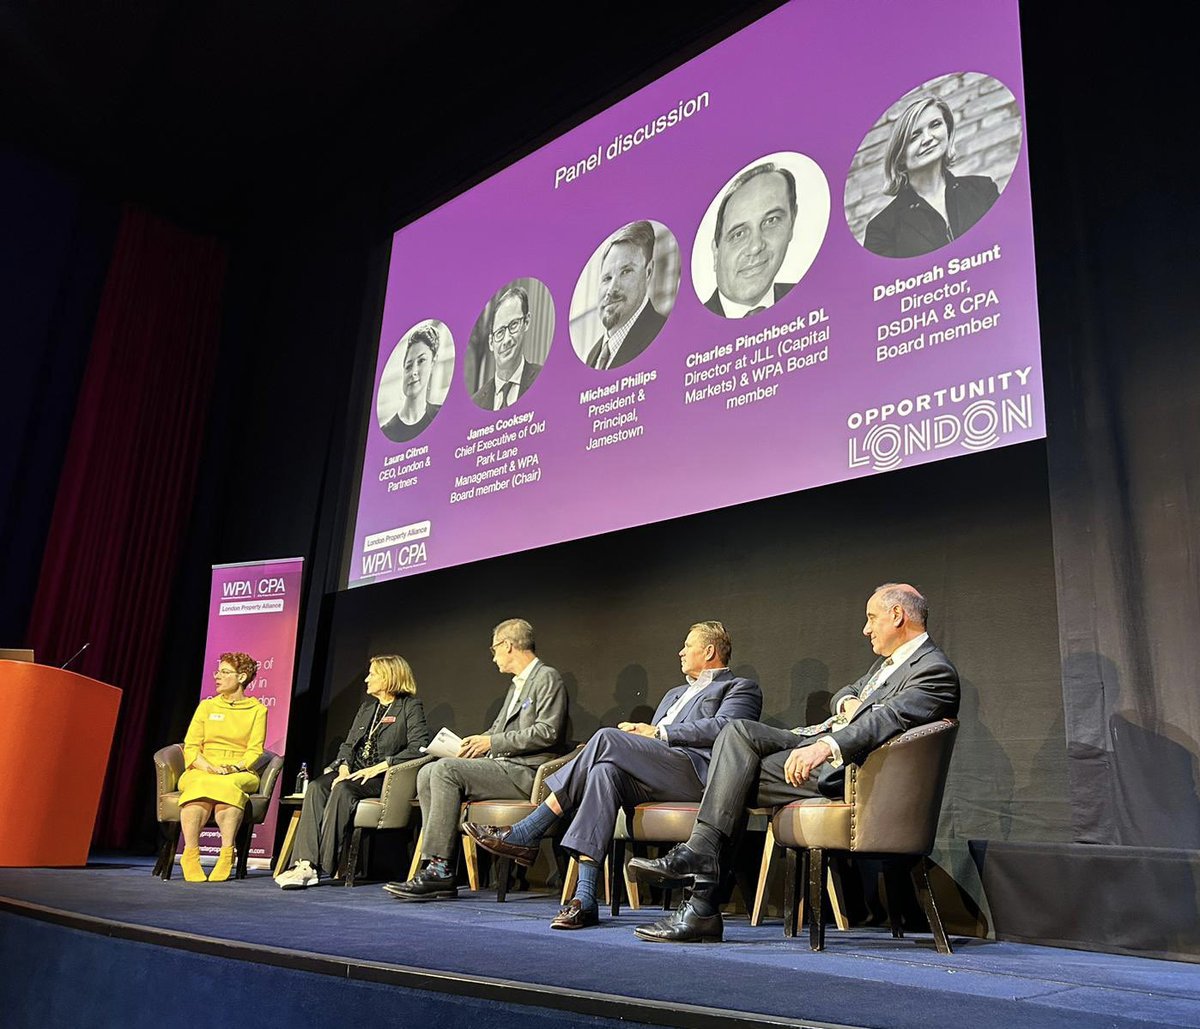 Our panel of experts, James Cooksey (OPLM), @LauraCitron (@londonpartners), Michael Philips (Jamestown), Charles Pinchbeck DL (@JLL) and @DeborahSaunt (@DSDHA) discussing the differences between New York and London and what can be learnt from one another